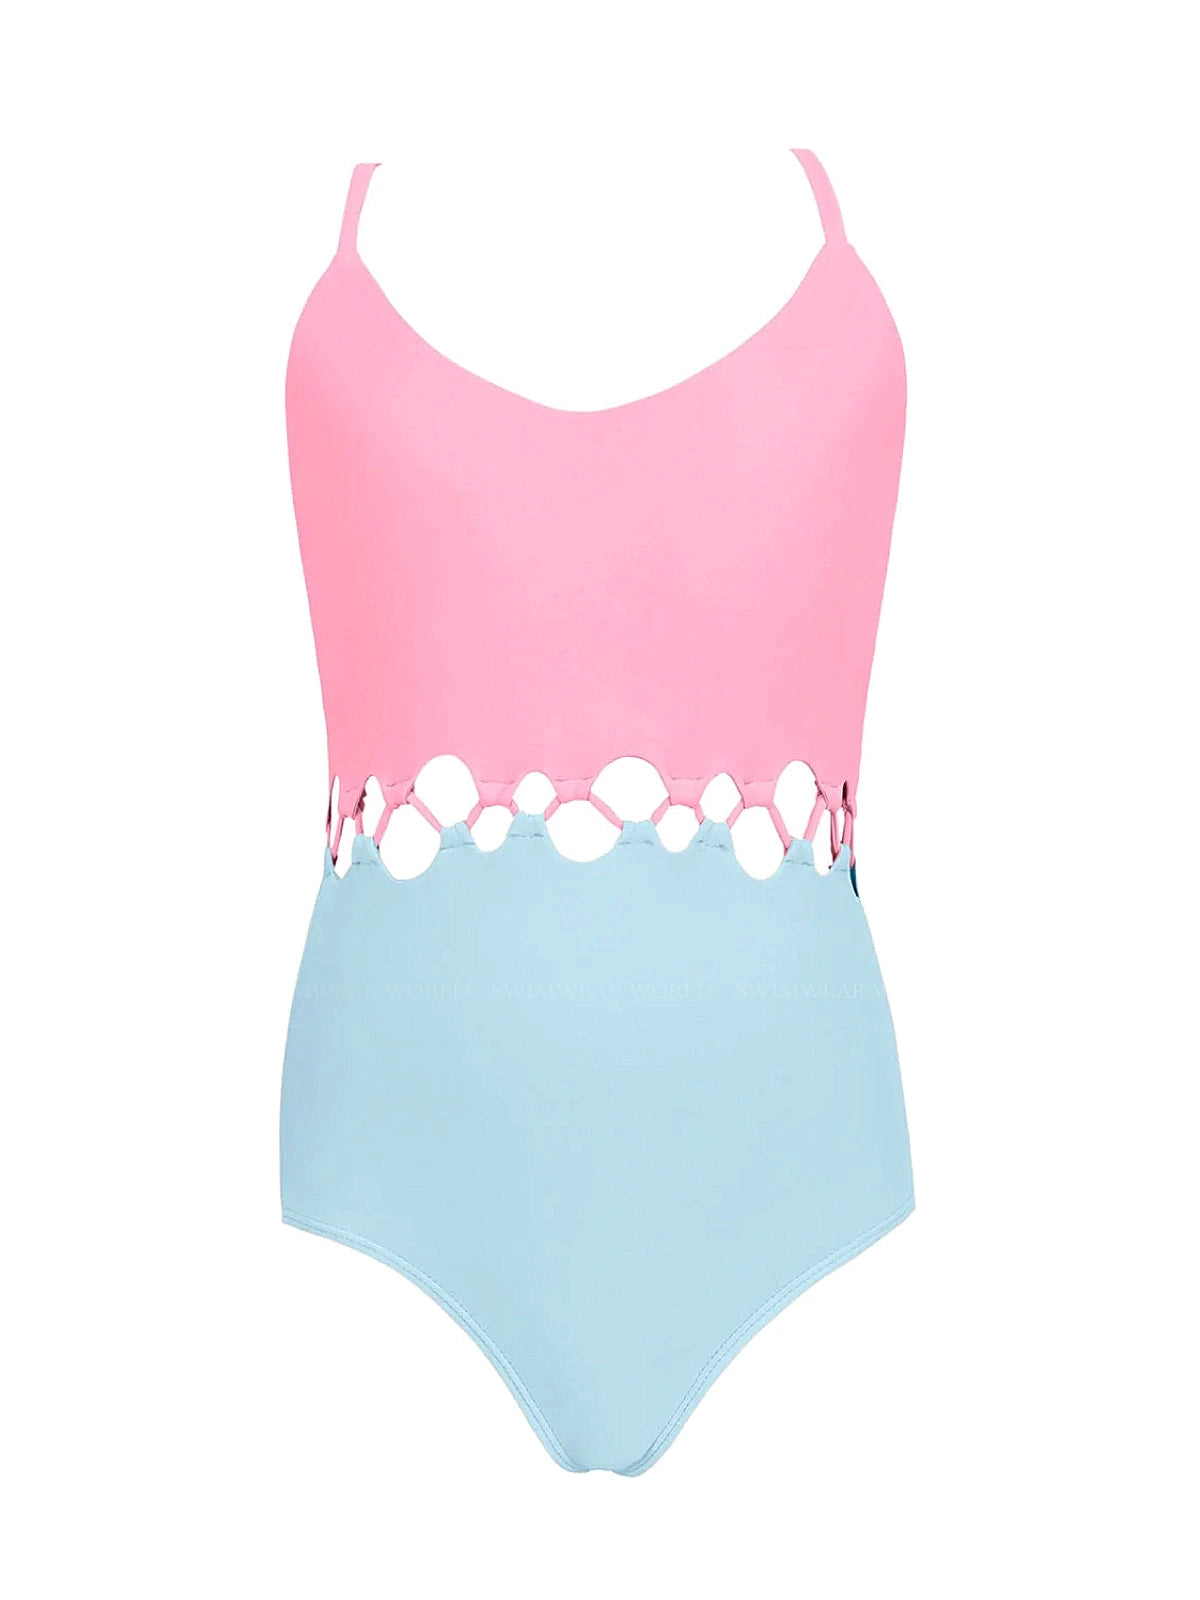 Teen Girls Gingham Pattern Cut-out Knot One Piece Swimsuit